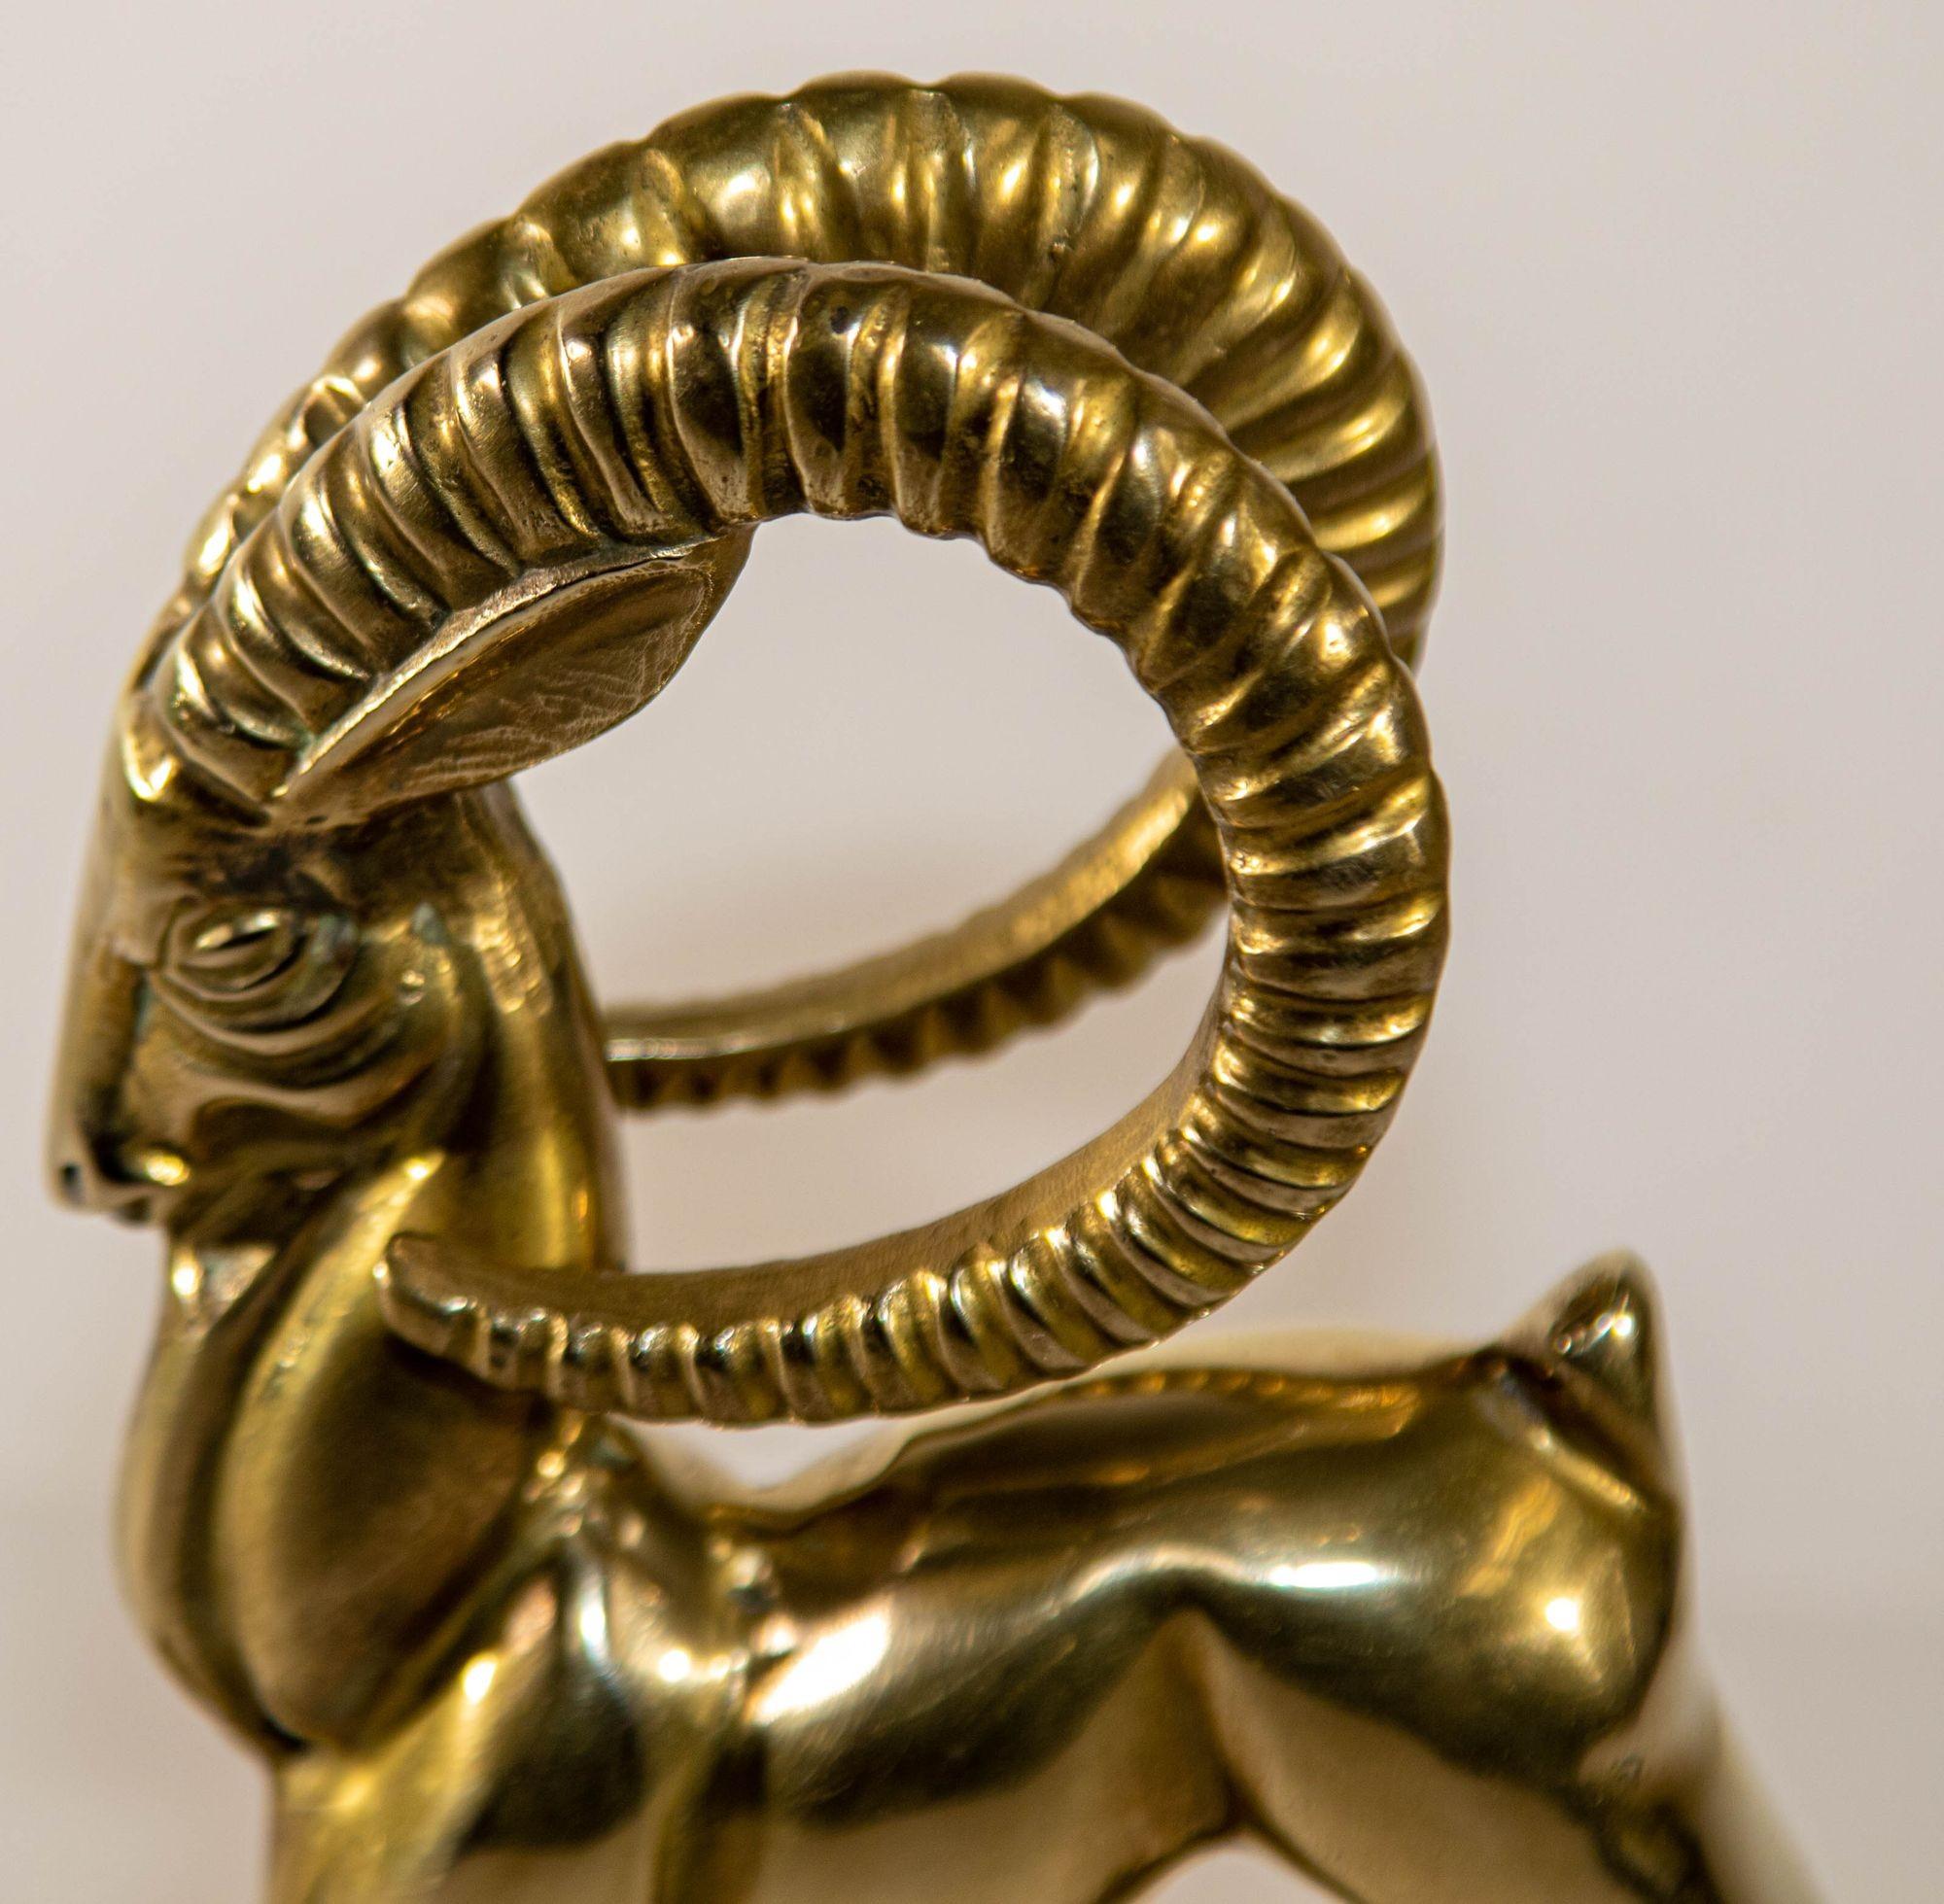 20th Century Vintage French Art Deco Style Sculpture of Brass Ibex Antelope For Sale